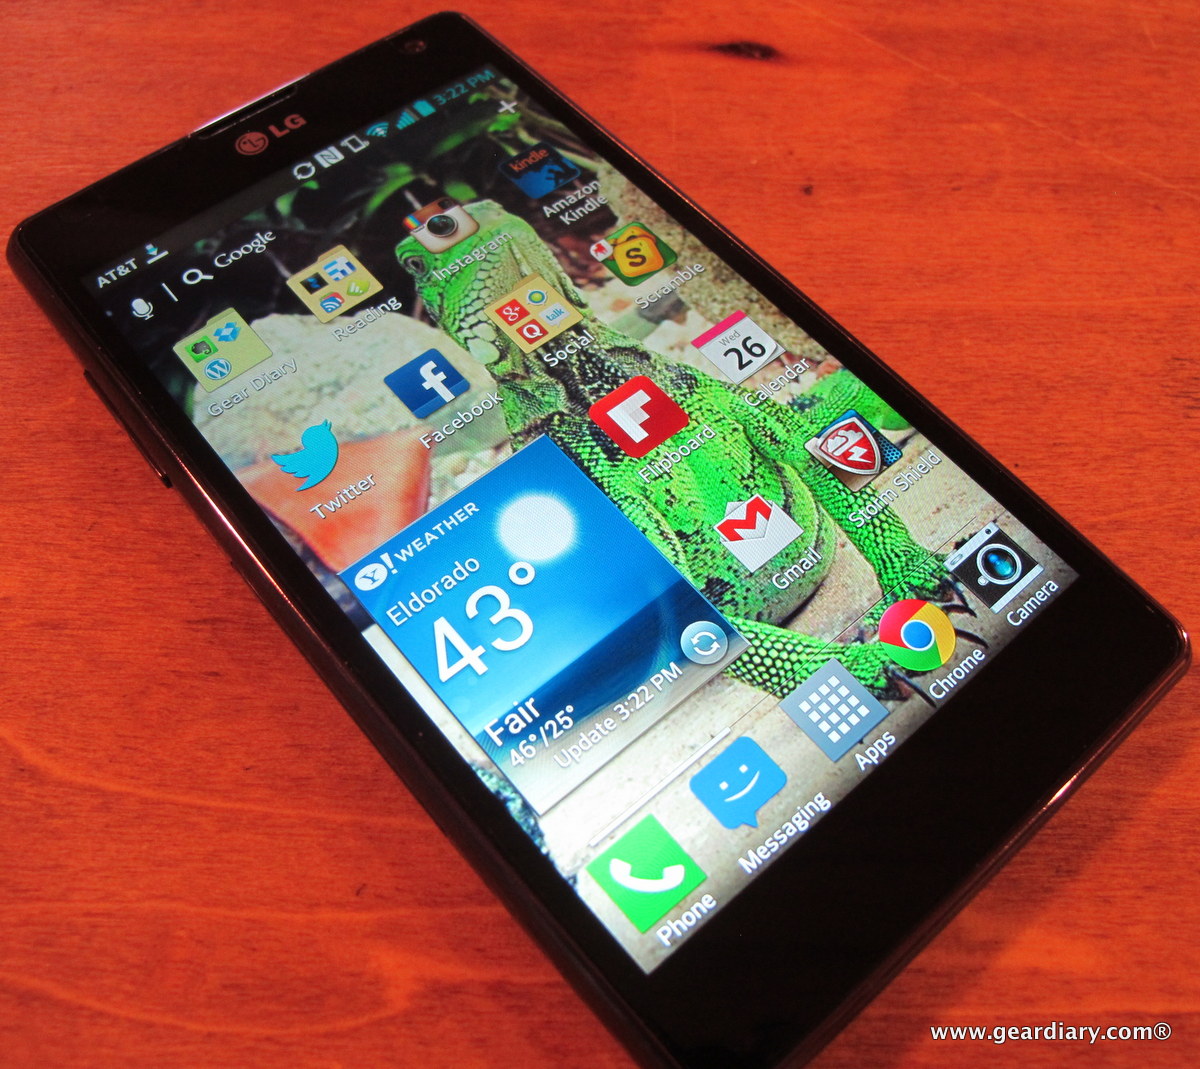 AT&T LG Optimus G Android Phone Review